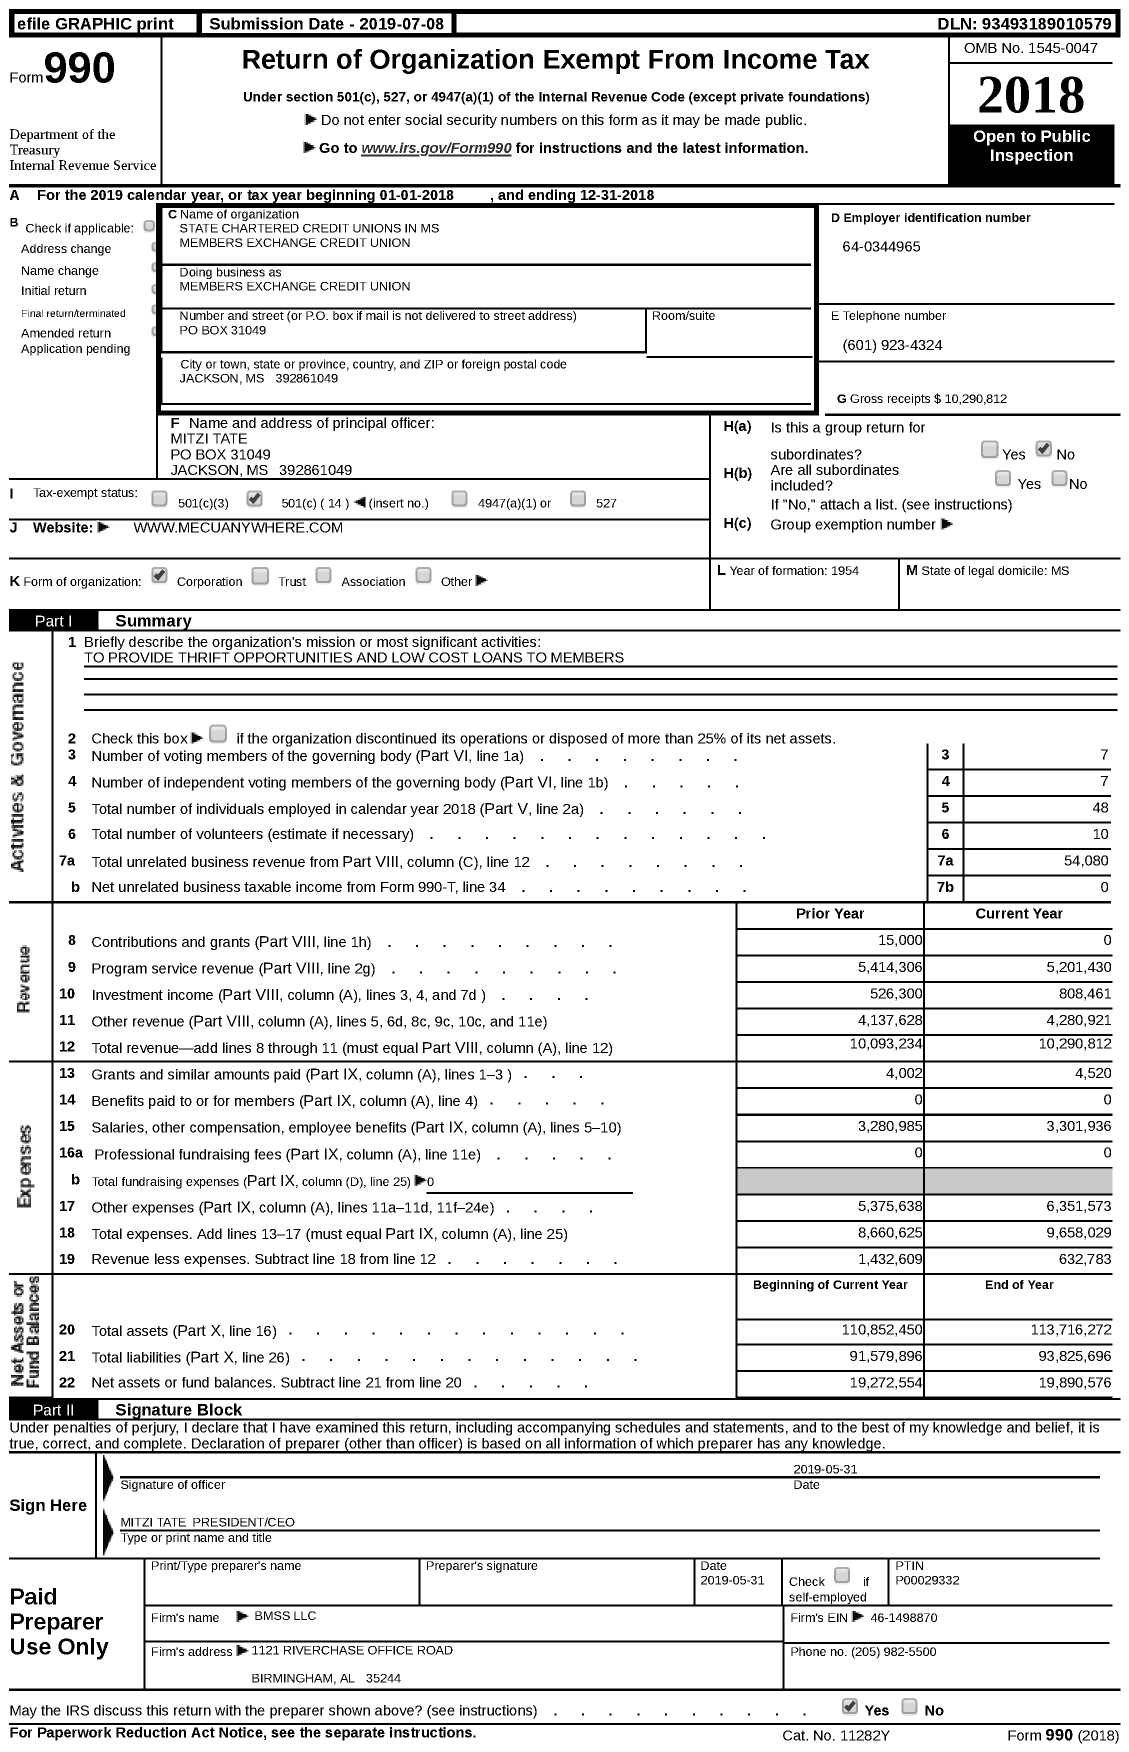 Image of first page of 2018 Form 990 for State Chartered Credit Unions in MS Members Exchange Credit Union